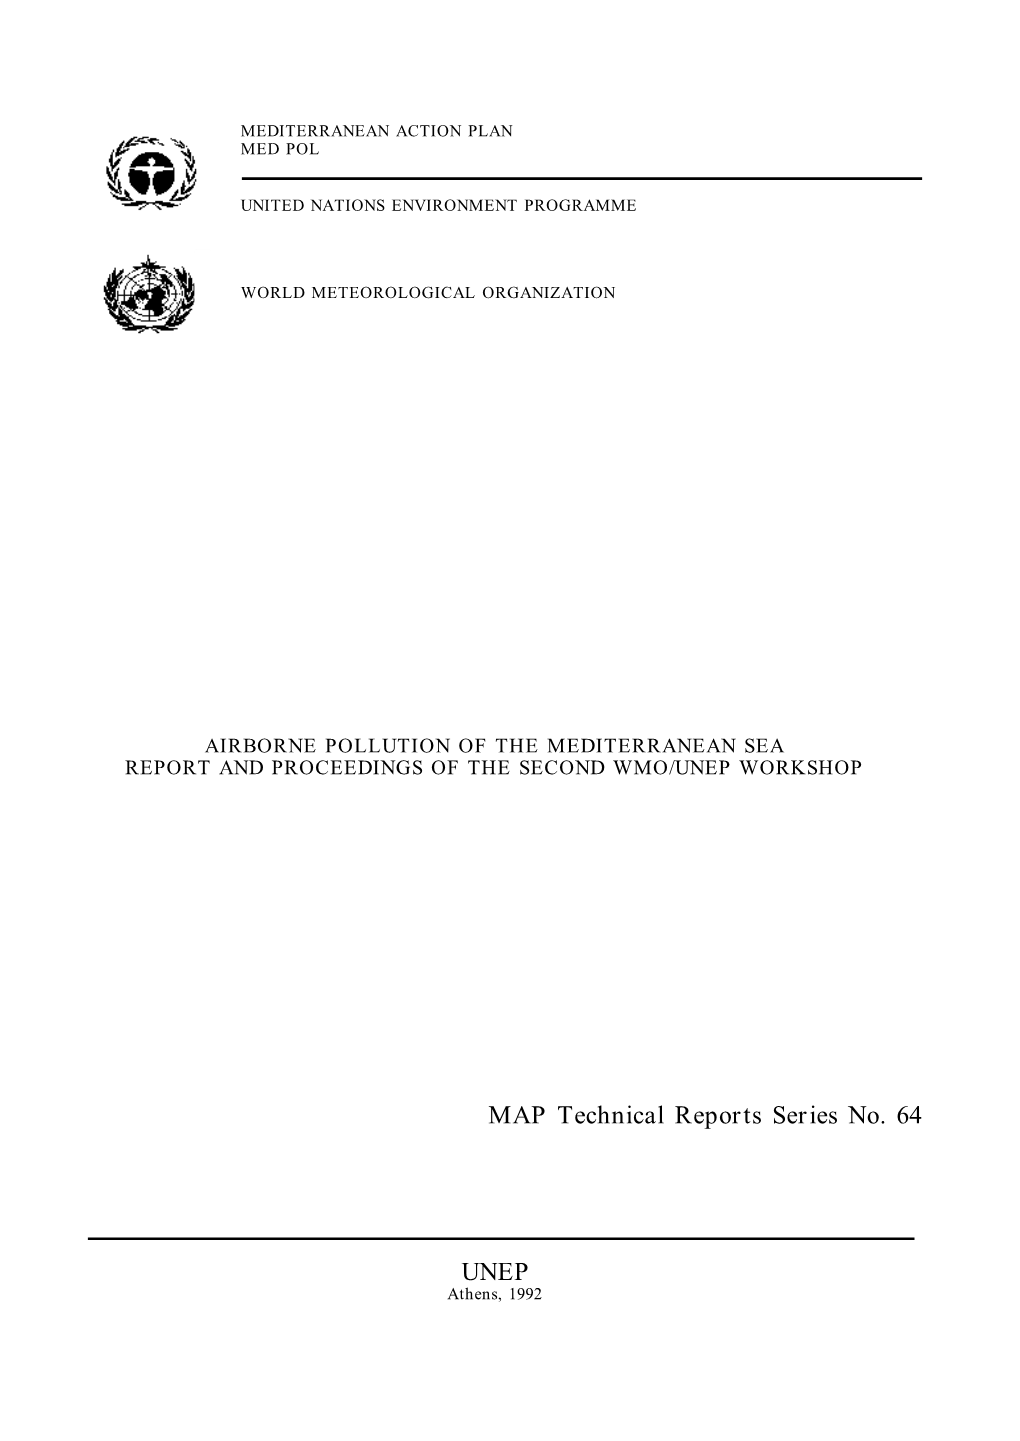 MAP Technical Reports Series No. 64 UNEP